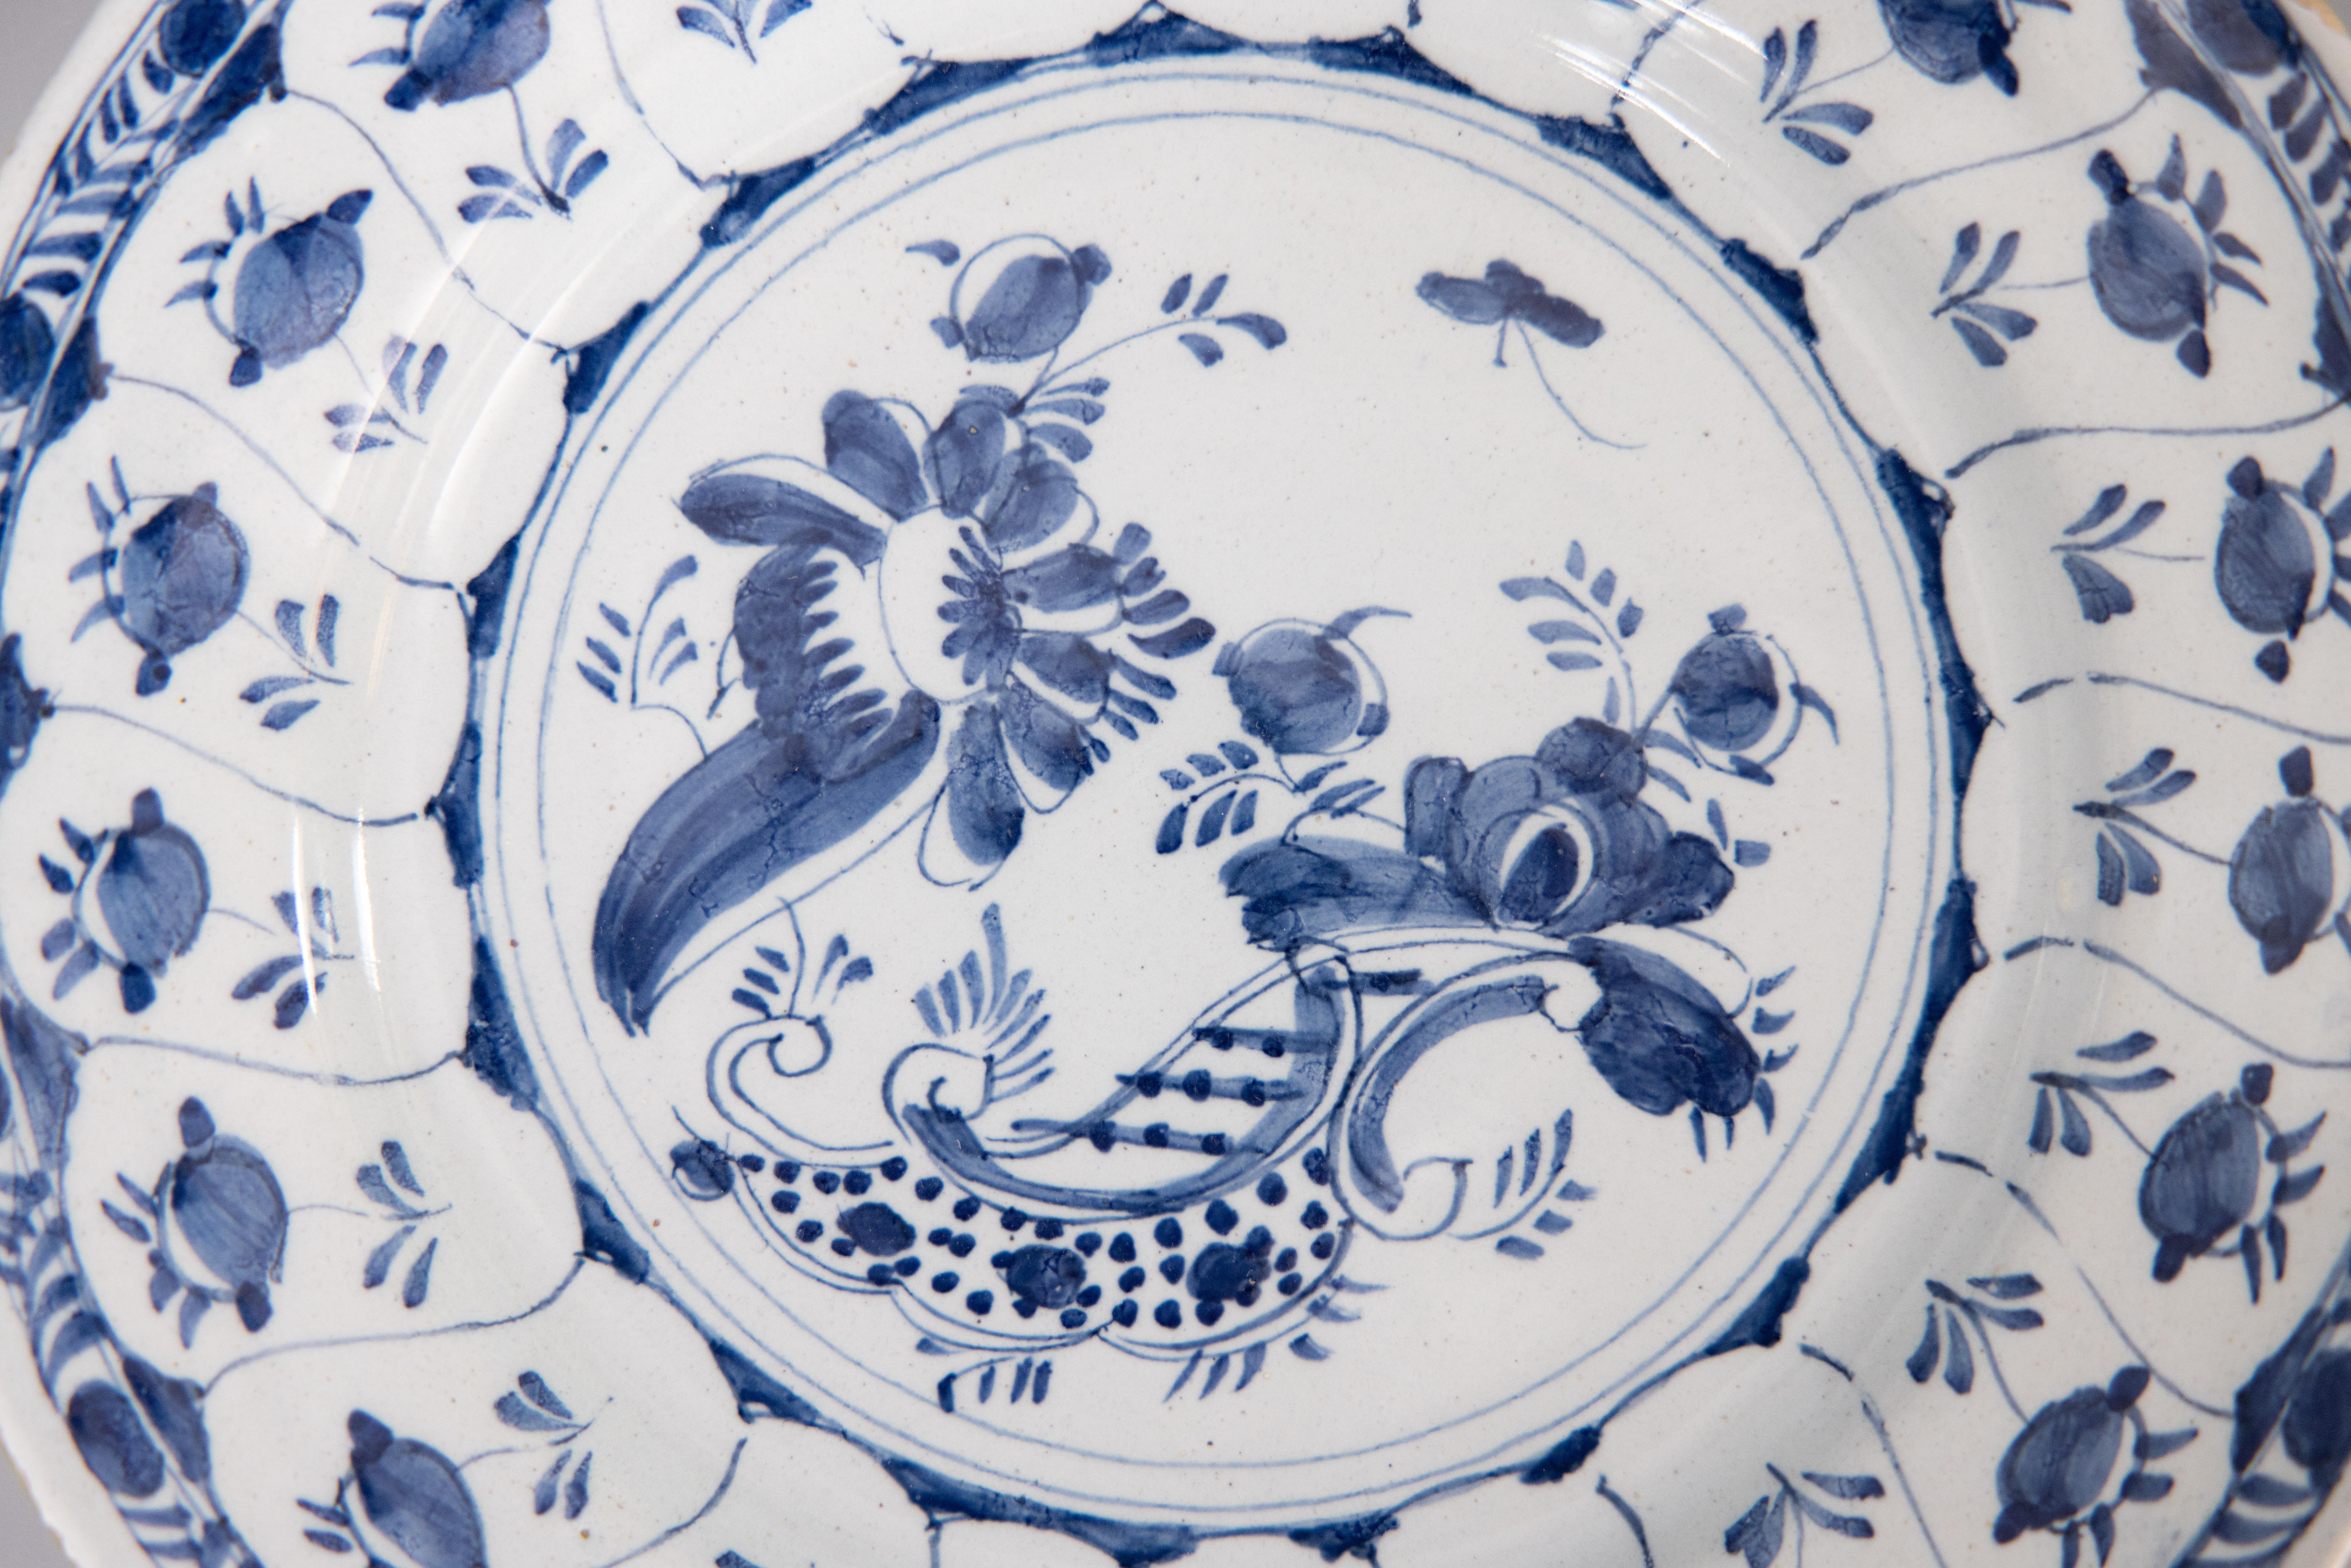 A superb antique 18th-century Dutch Delft faience floral plate. This lovely plate has hand painted flowers, a butterfly, and foliate border in cobalt blue and white. It would be wonderful added to a collection, displayed on a wall or in a